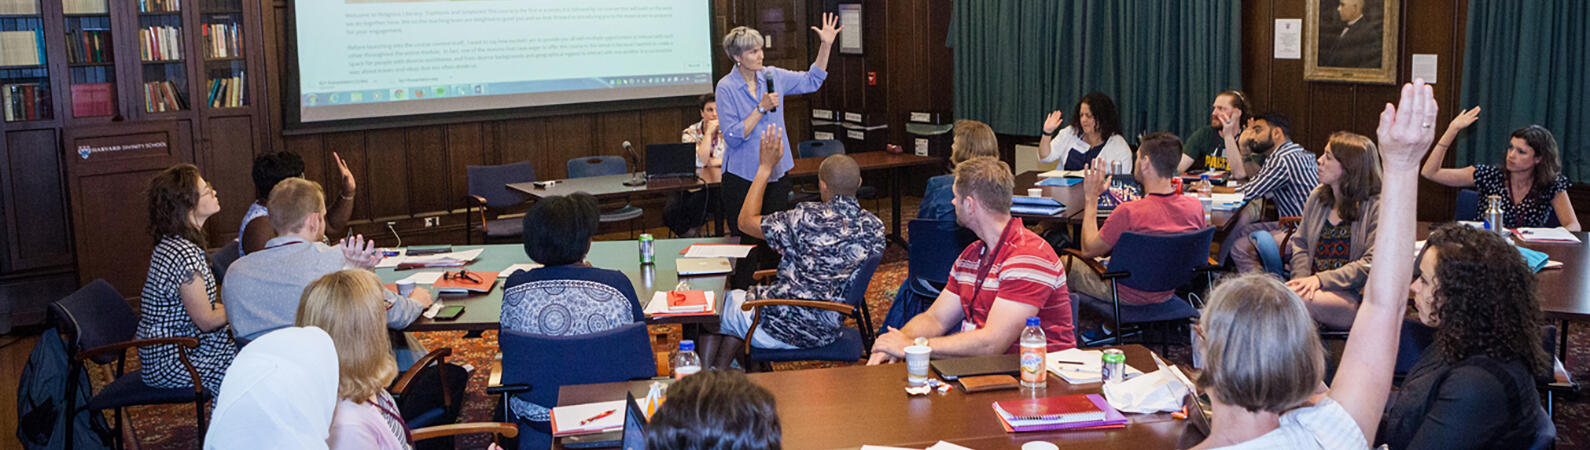 Diane Moore teaching a class, students with raised hands